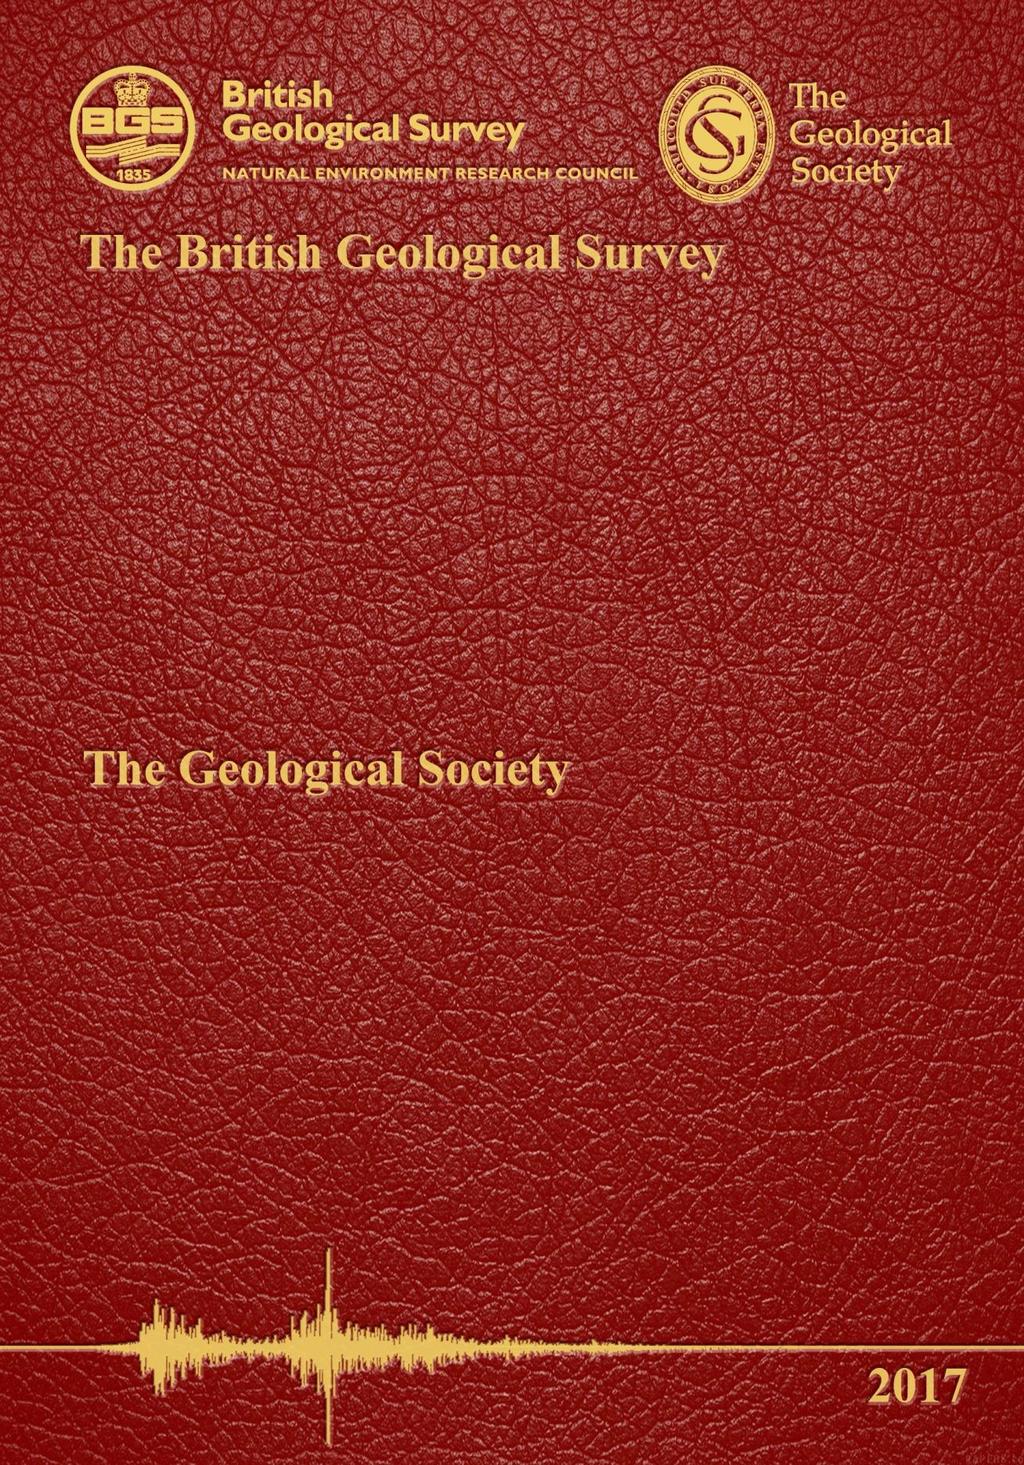 Founded in 1835, the British Geological Survey (BGS) is the world's oldest national geological survey and the United Kingdom's premier centre for Earth science information and expertise.